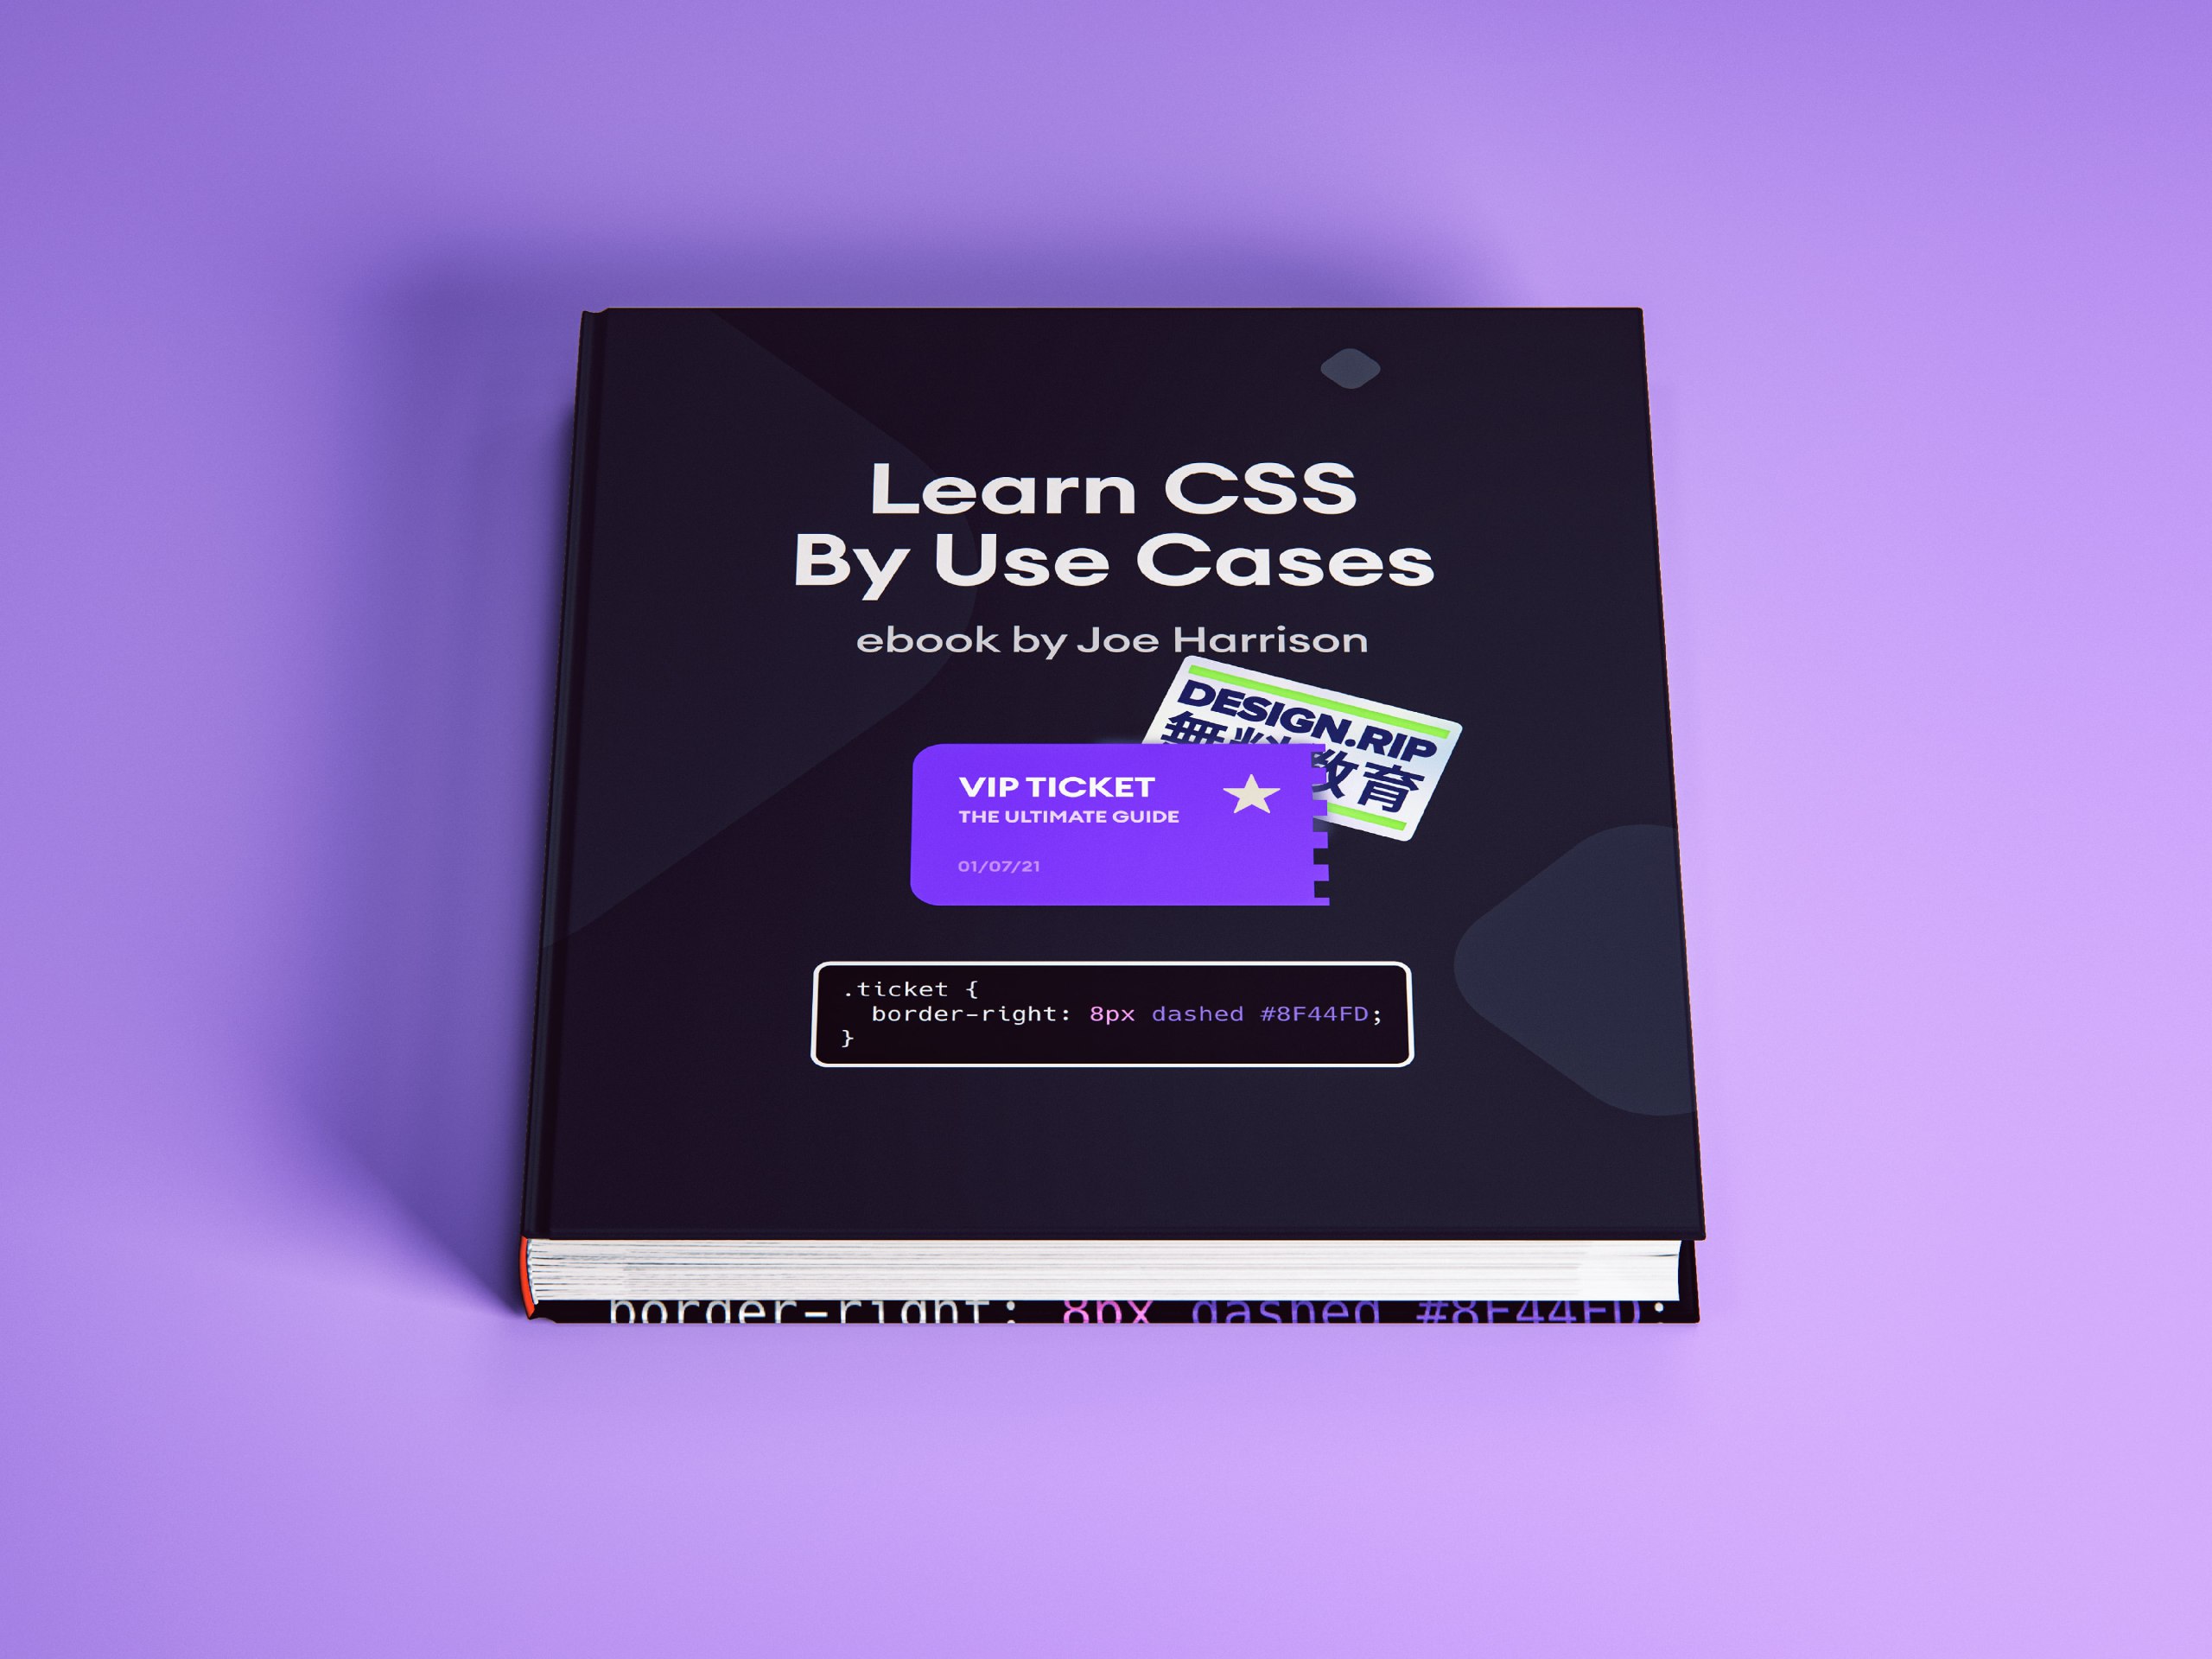 [VIP] Joe Harrison: Learn CSS By Use Cases